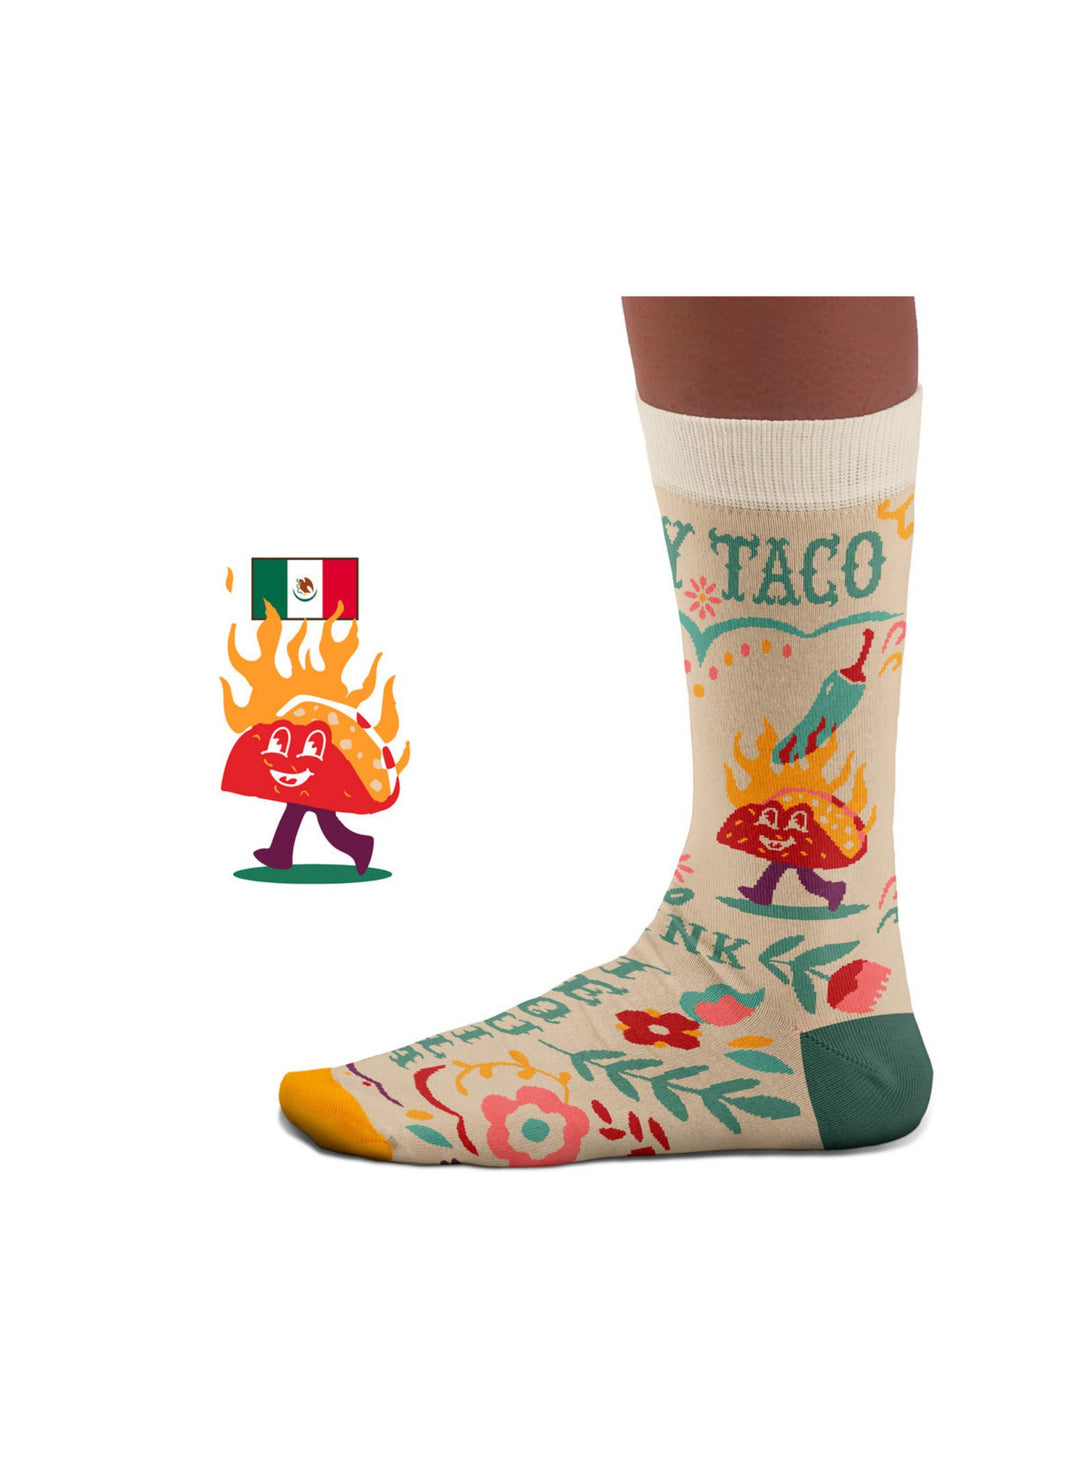 Chaussettes Tacos Mexicains